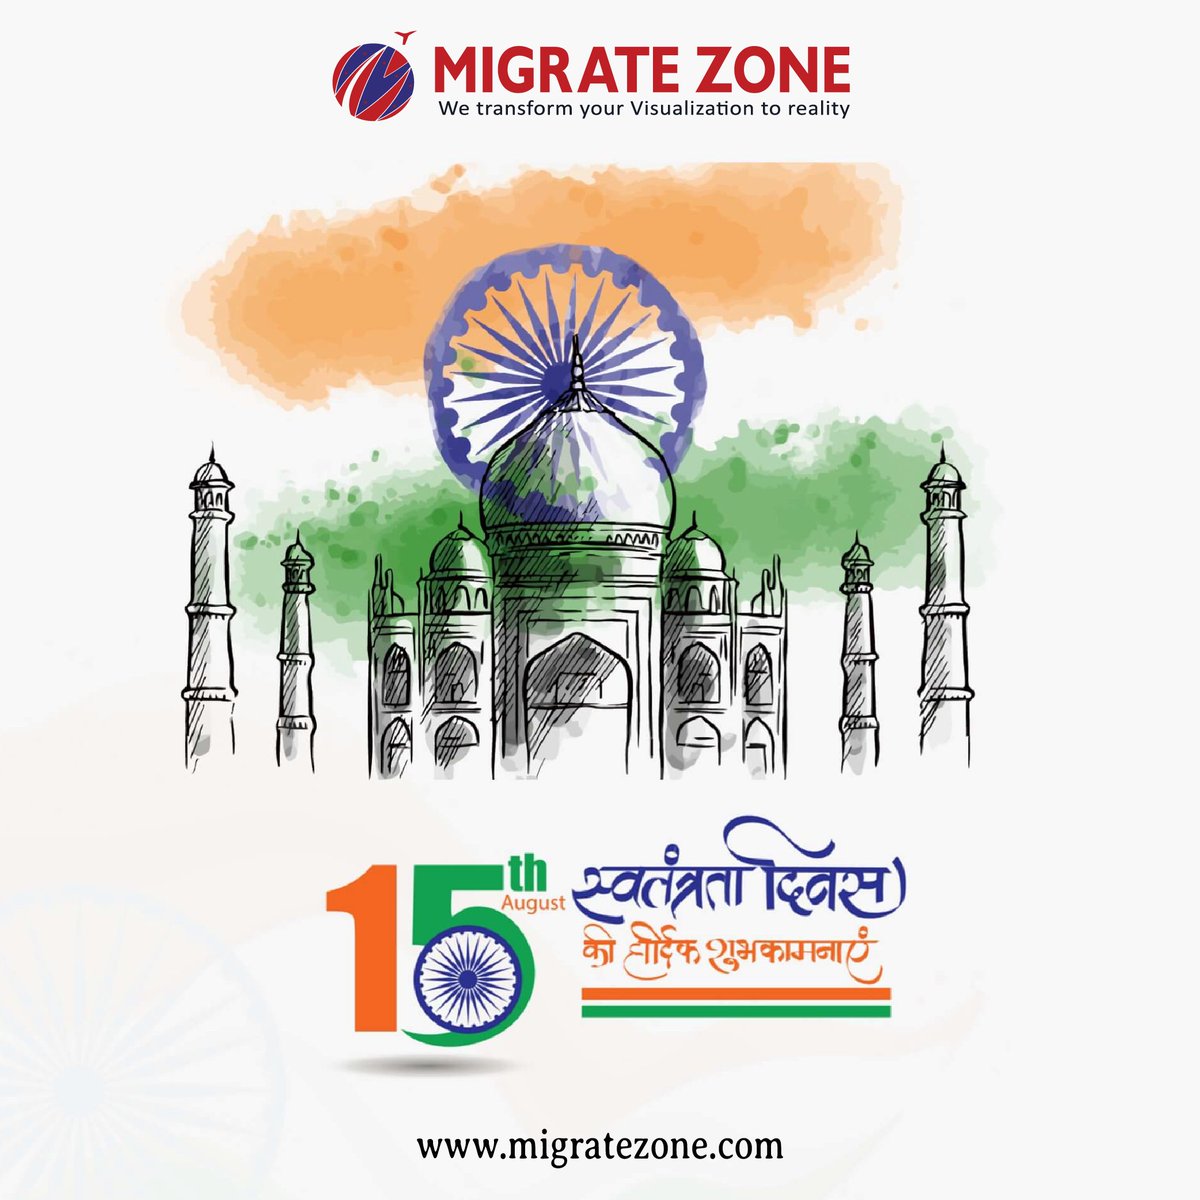 Independence Day is a day to celebrate the unity of India, its culture and heritage Happy Independence Day!
.
.
#IndependenceDay #india #migratezone #evolgroup #happyindependenceday